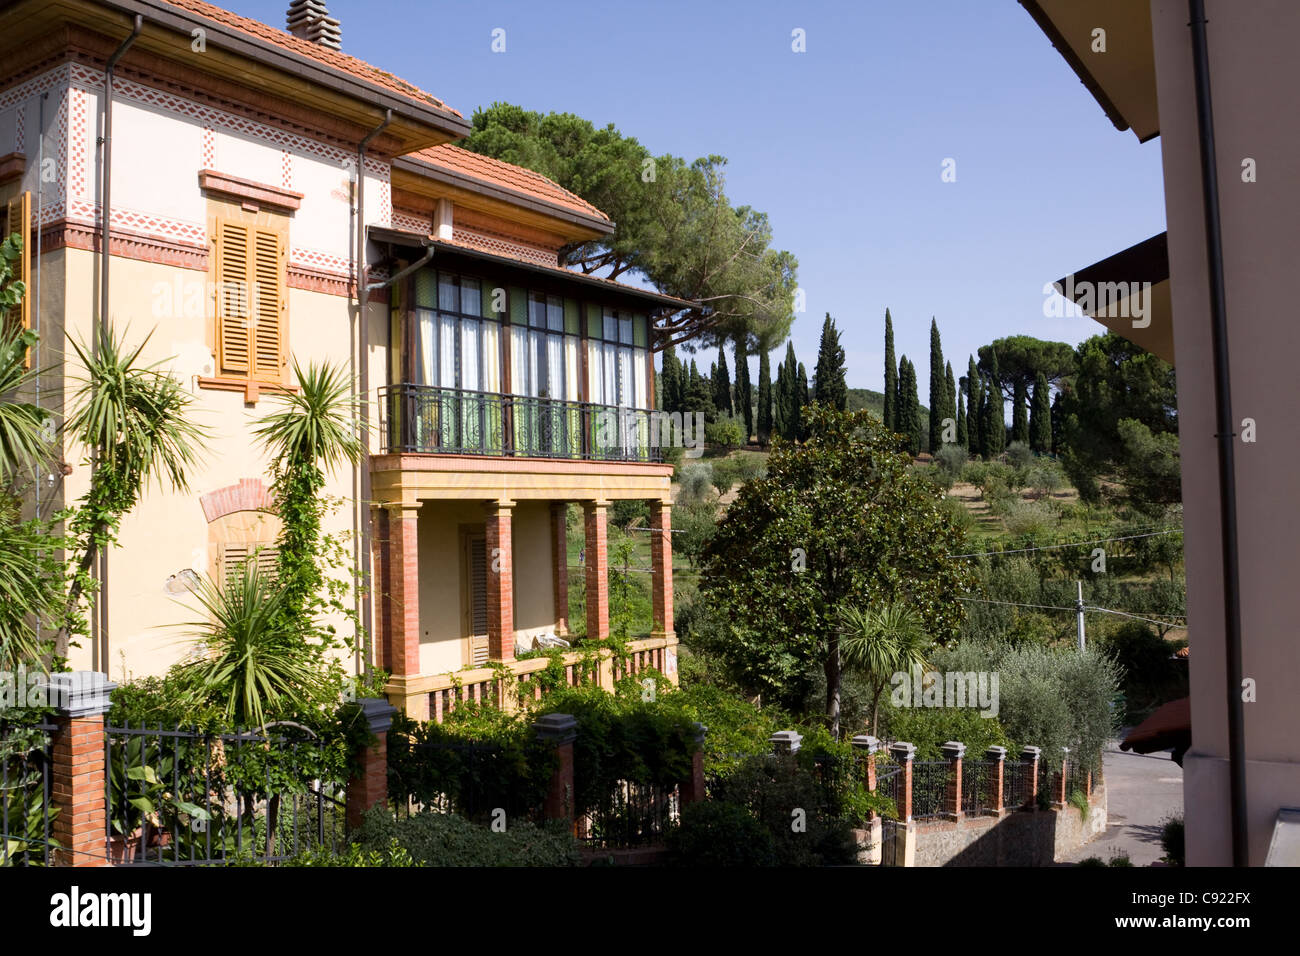 Tuscan villas on the hillside at Montecatini Terme are built to take advantage of the height and cool breeze on the hillside. Stock Photo